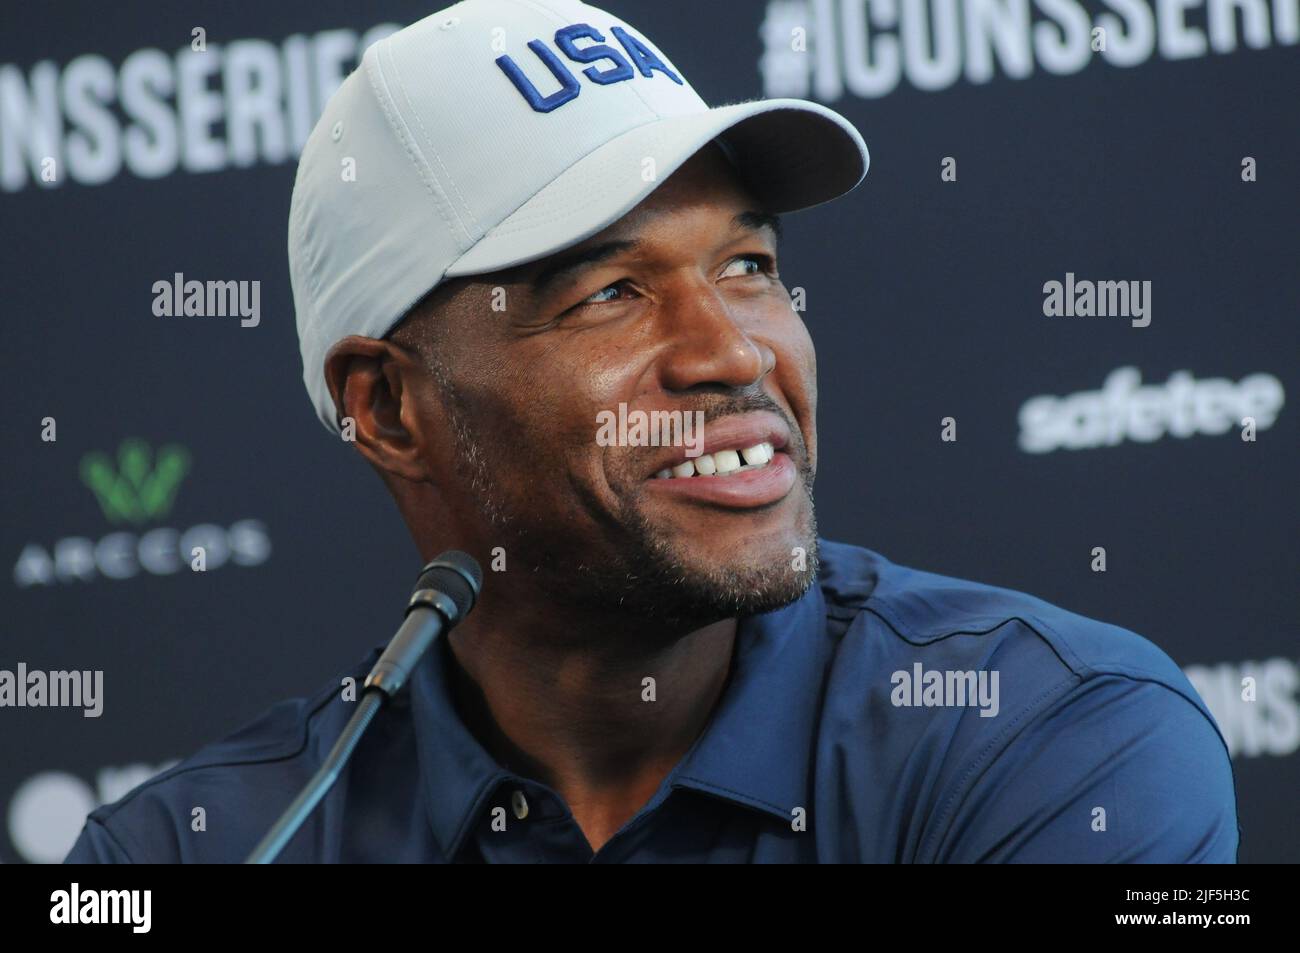 Jersey, United States. 29th June, 2022. Michael Strahan attends the Icons Series Press Conference in Liberty National Golf Club, Jersey City. (Photo by Efren Landaos/SOPA Images/Sipa USA) Credit: Sipa USA/Alamy Live News Stock Photo